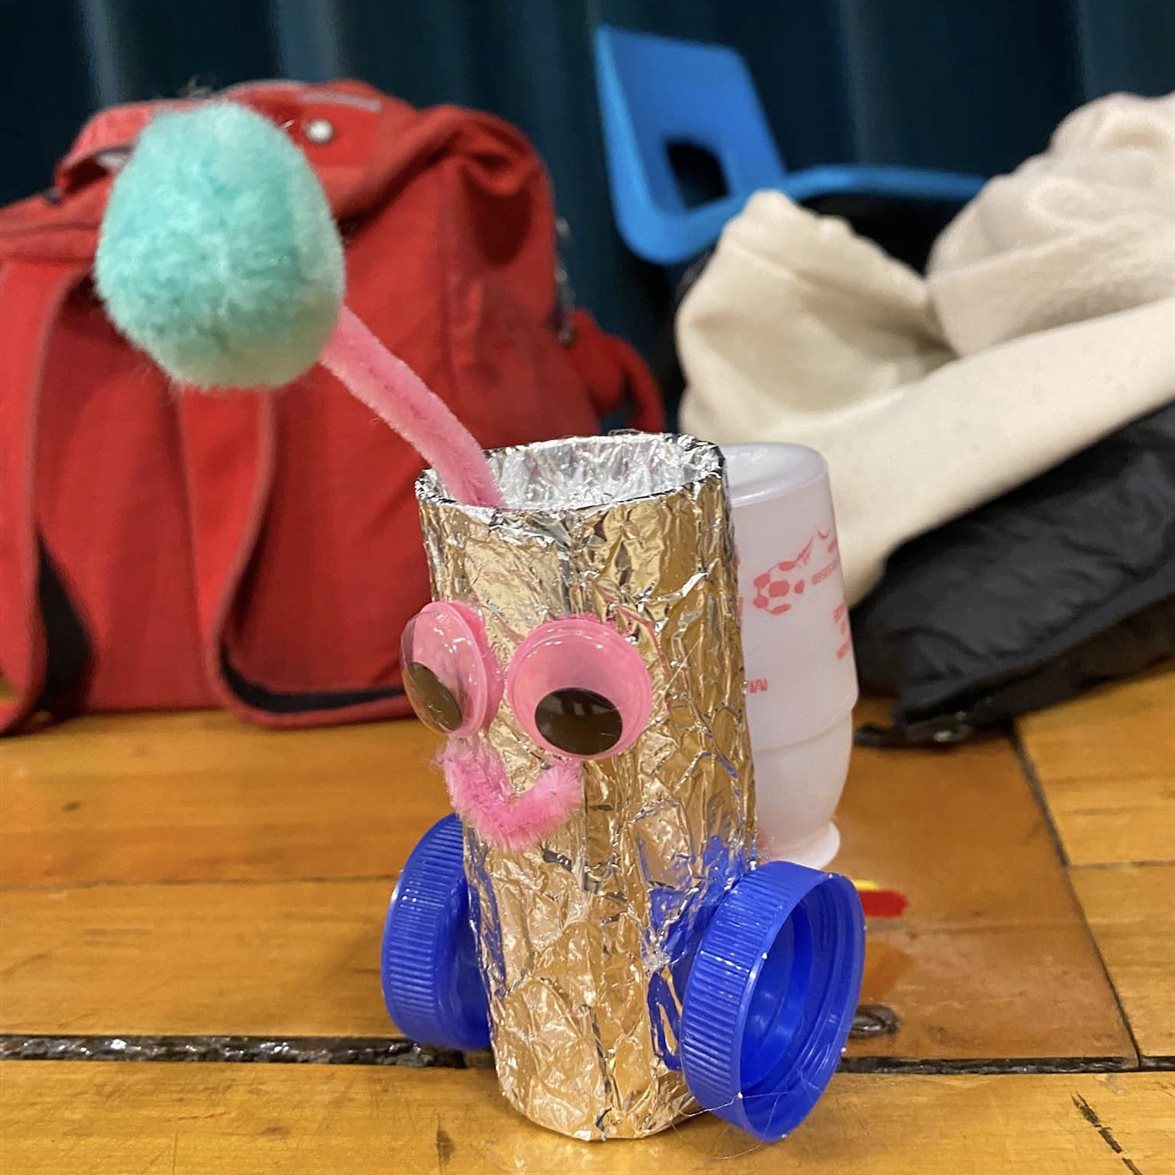 A toy made from recycled parts during MatSE grad student Edgar Mejia's bilingual polymer workshop with Cena y Ciencias at Leal Elementary School in Urbana, Ill.